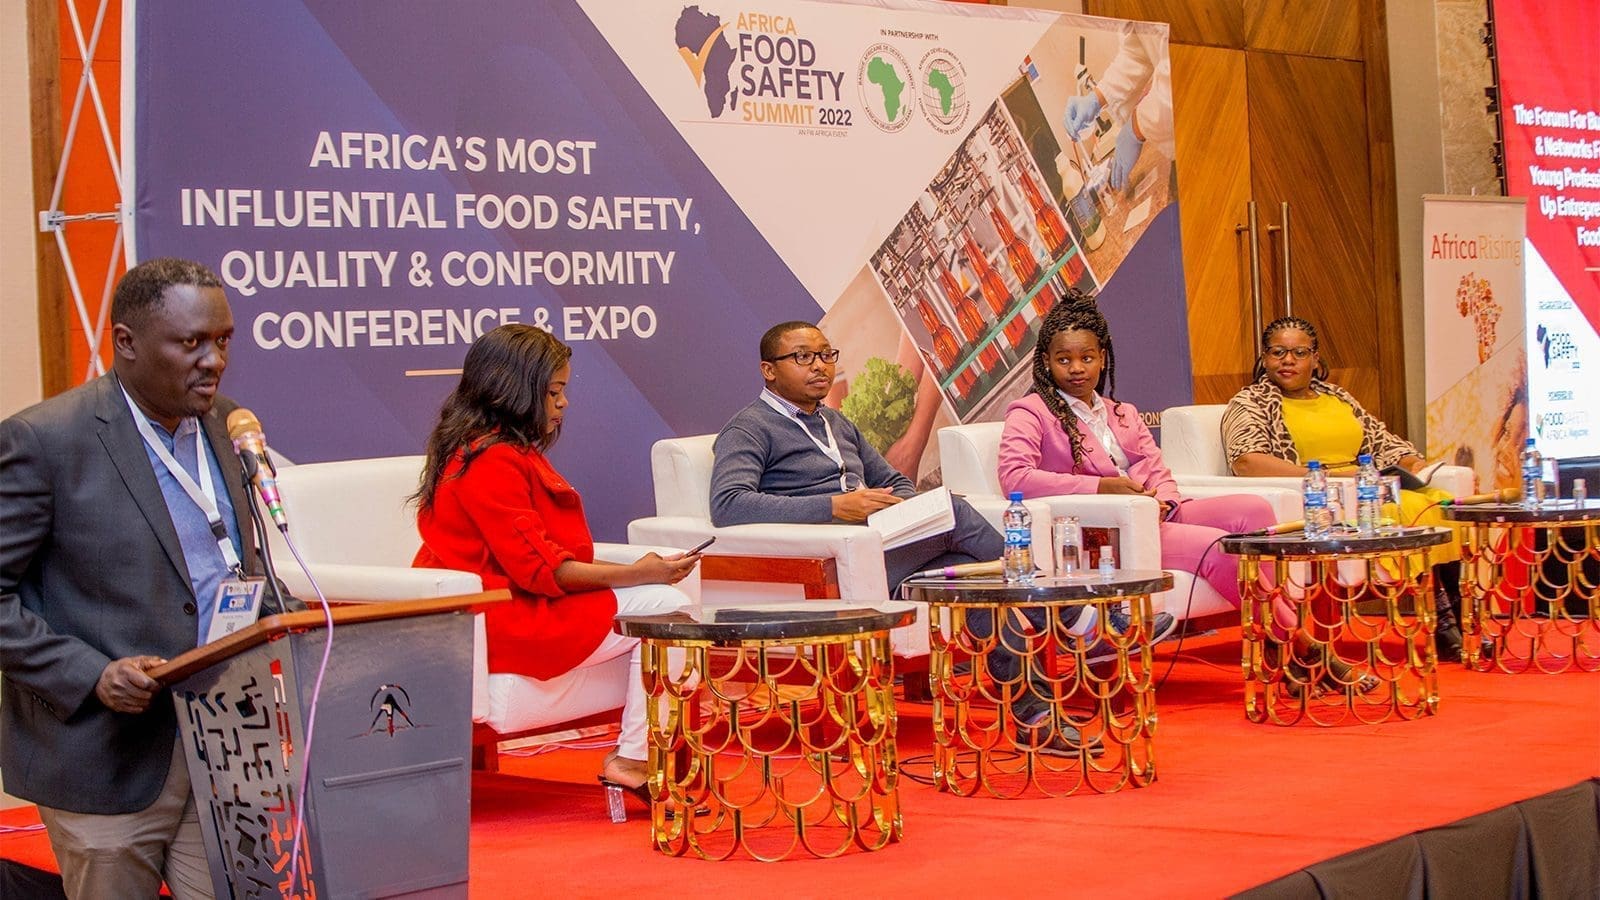 Africa Food Safety Summit 2023 gears up to enhance Food Safety and Quality in Africa